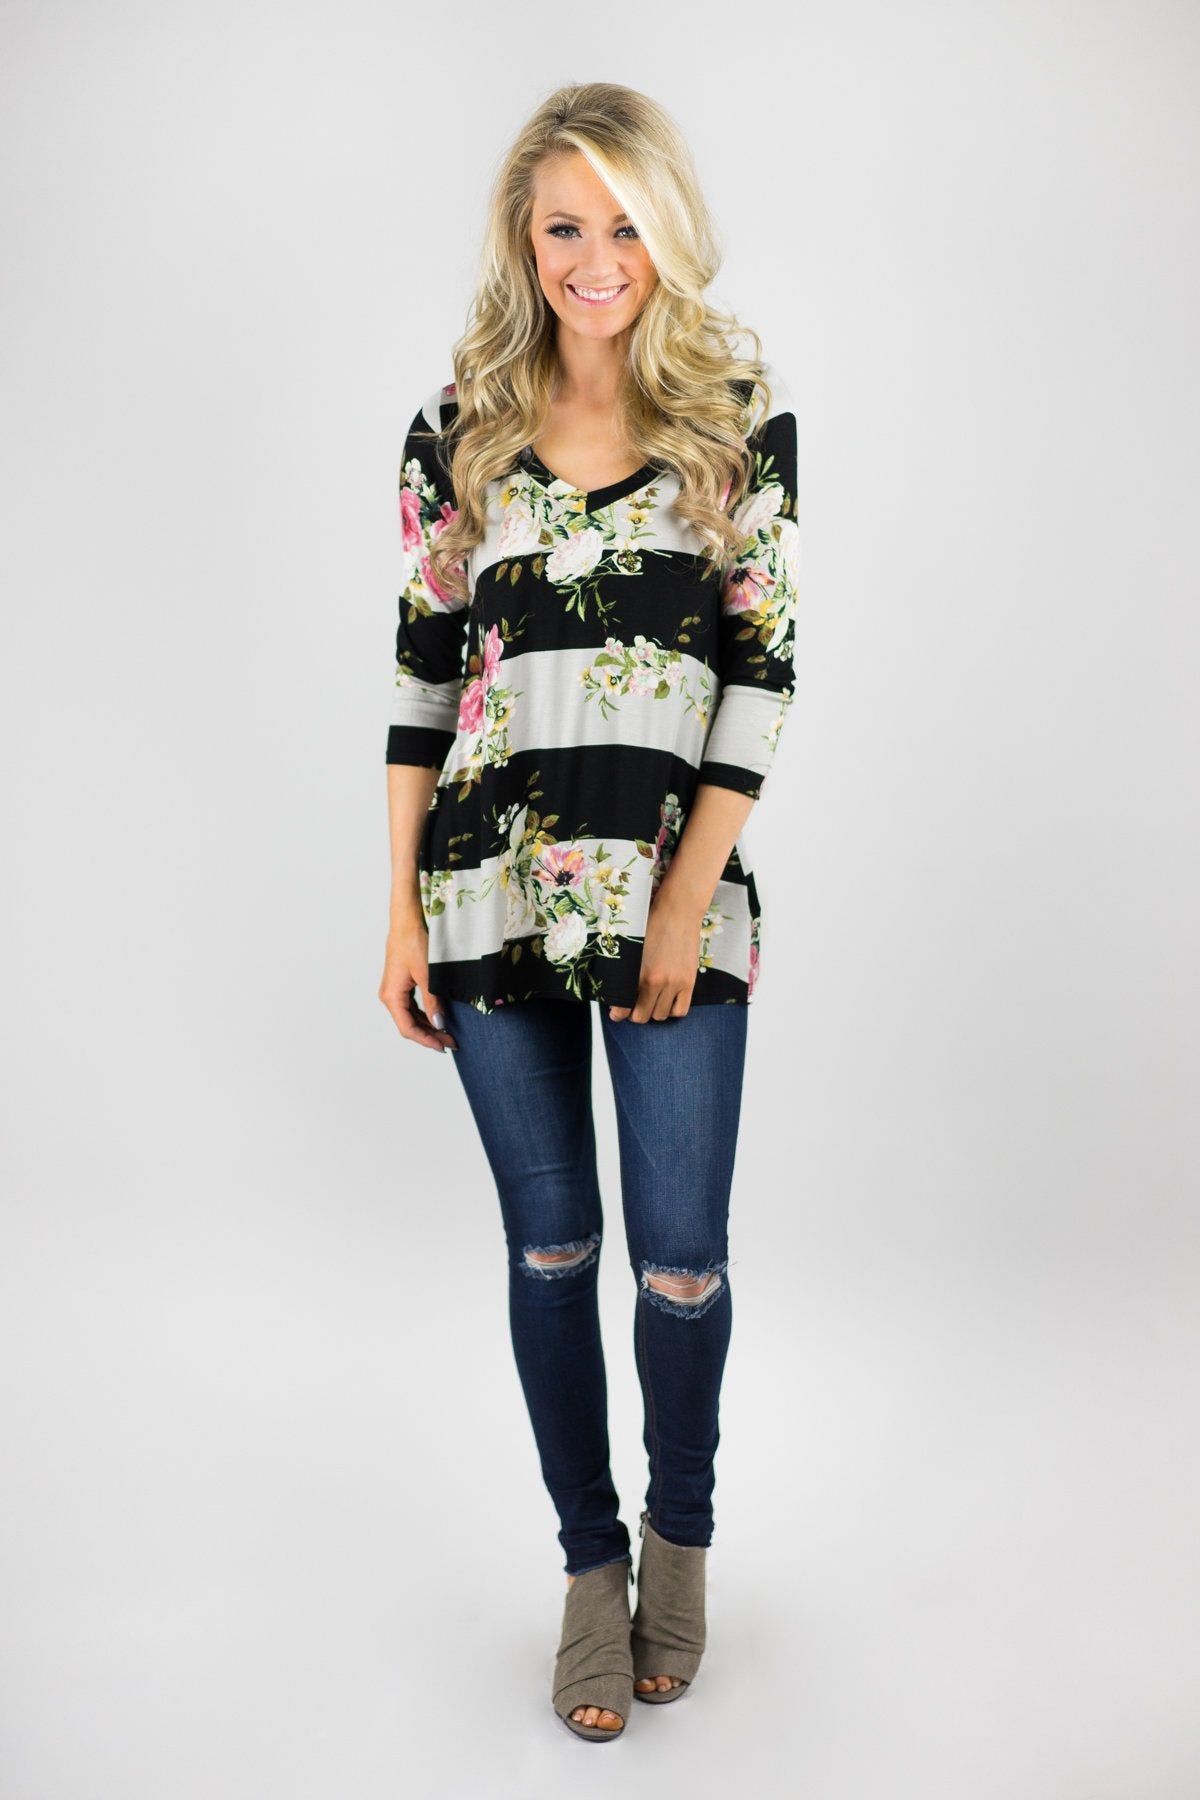 About Time 3/4 Sleeve Floral Top